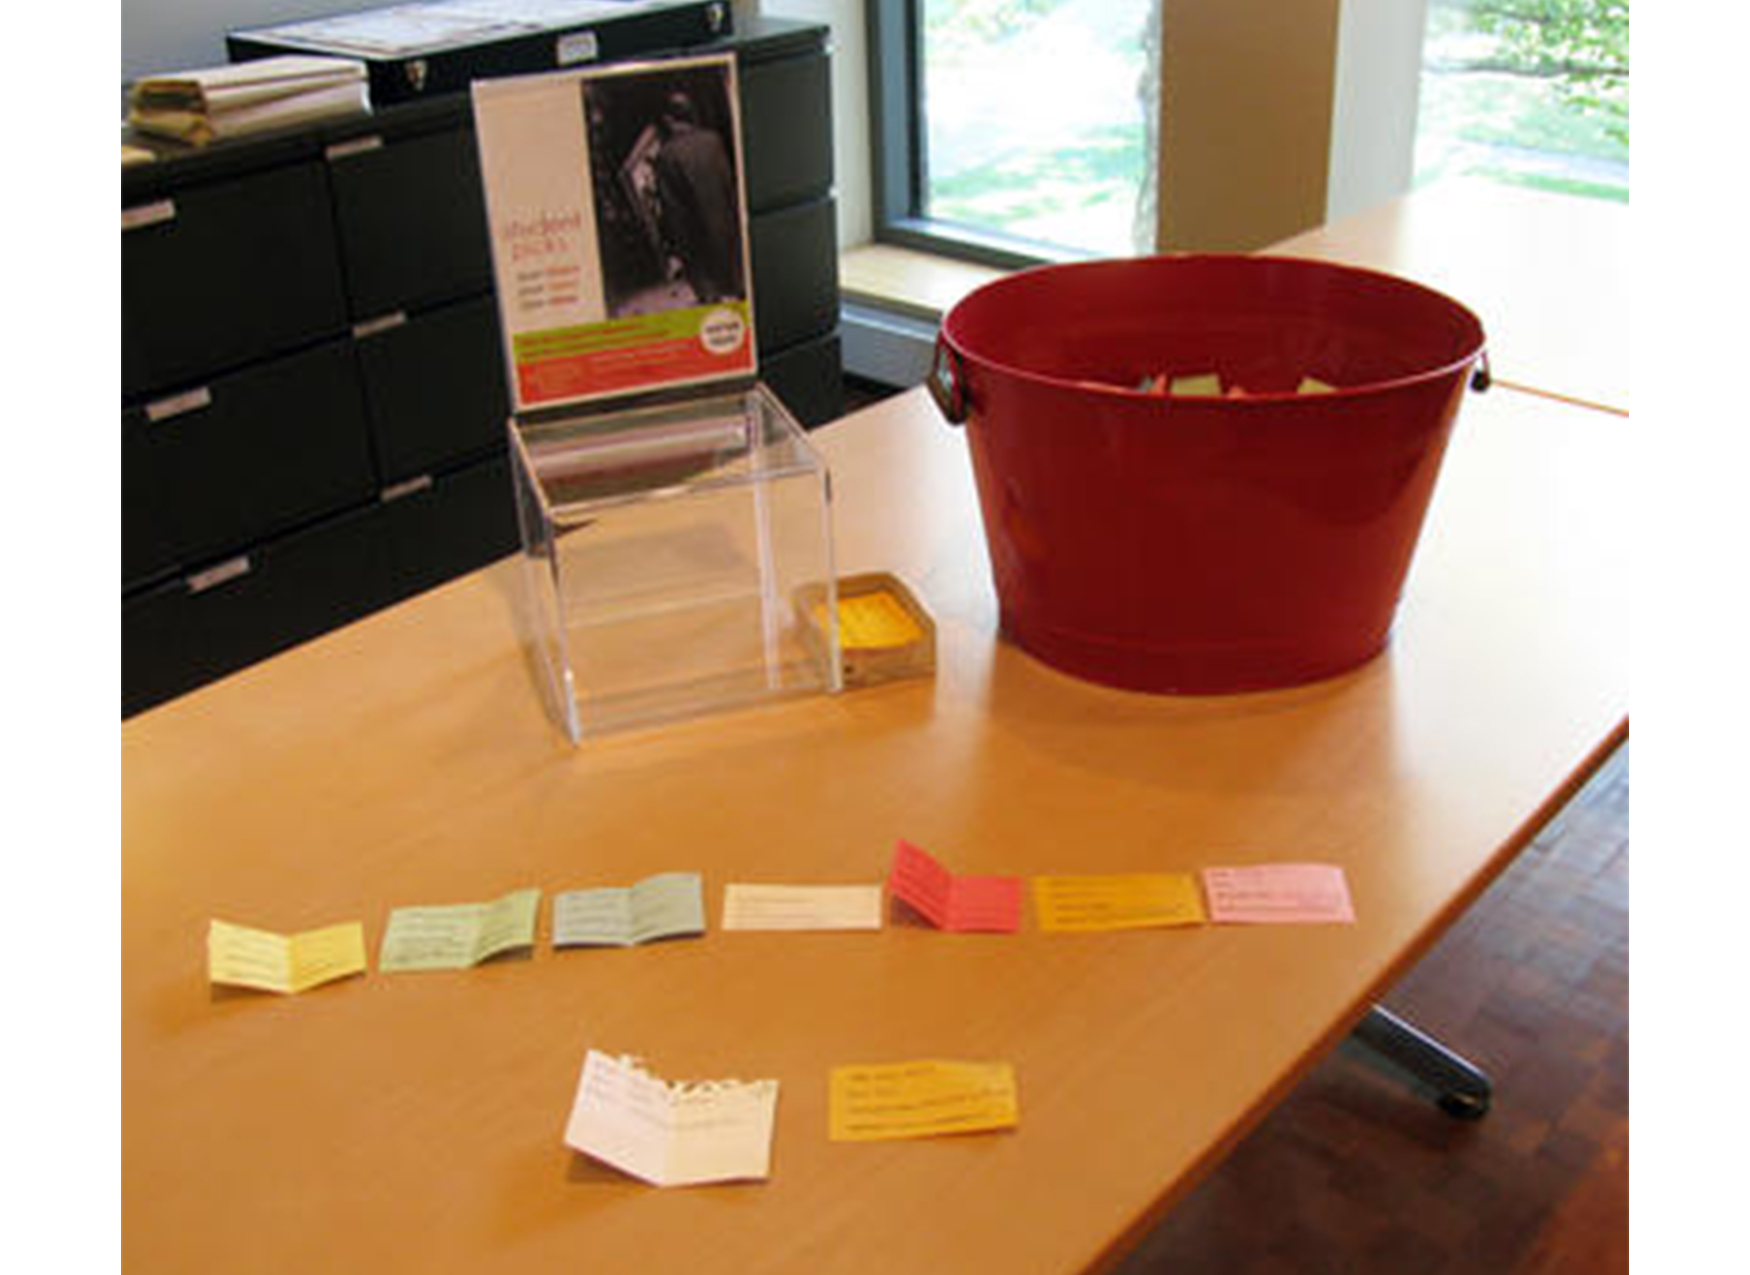 wooden table with a sign propped up on it, a red bucket full of colorful slips of paper, and nine slips of paper arranged in two rows